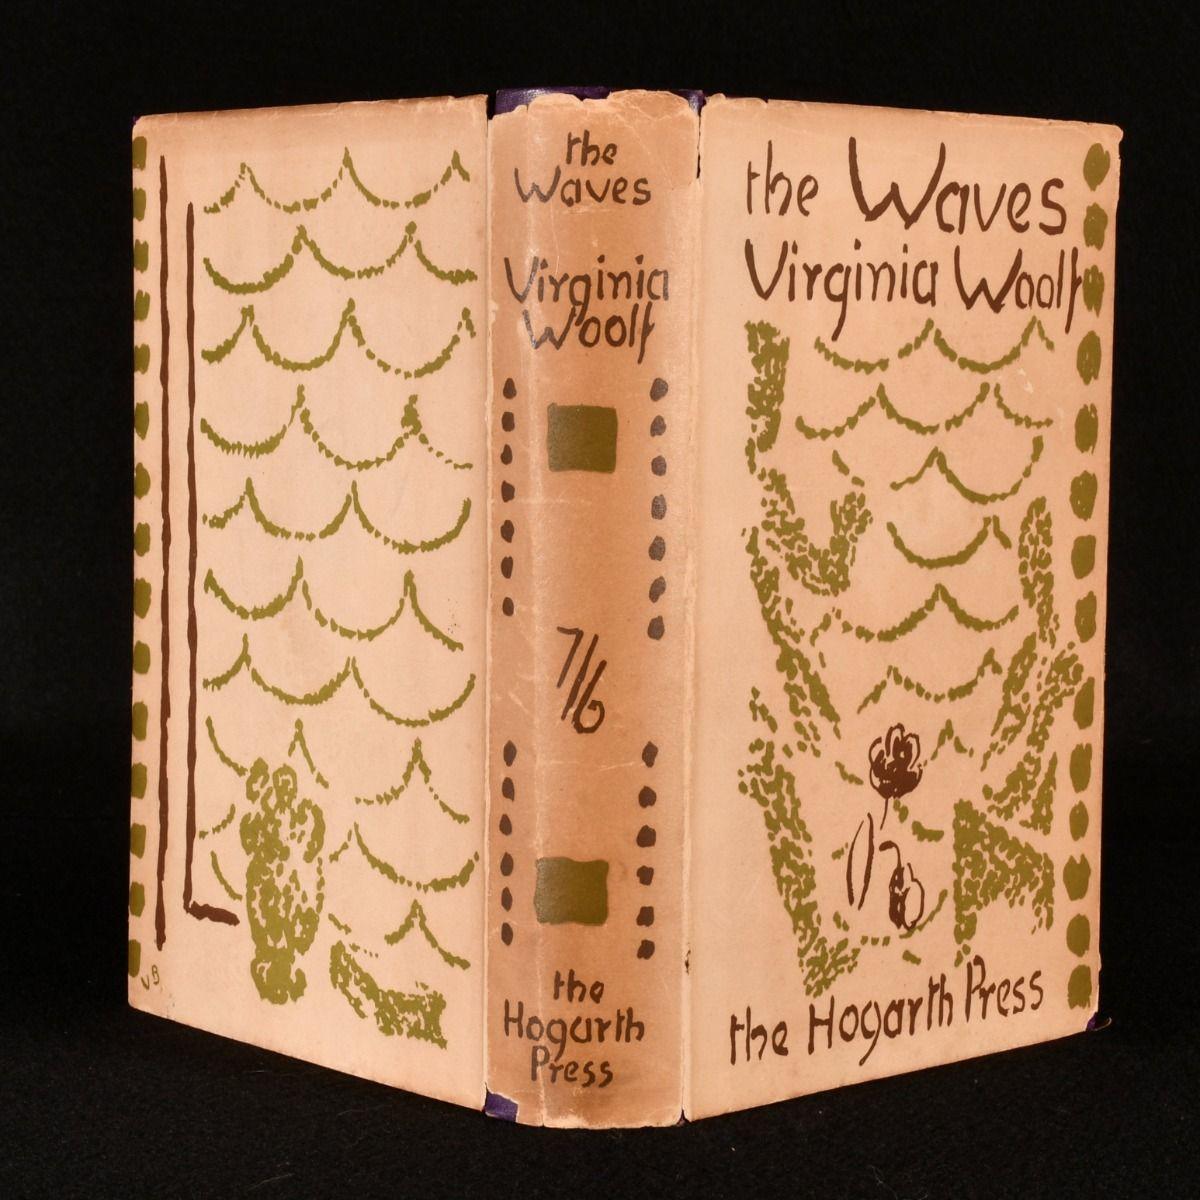 A nice first edition copy of this experimental novel by Virginia Woolf, one of her most puzzling publications, here in the original beautifully designed dust wrapper by Vanessa Bell.

The first edition, first impression of this work.

In the